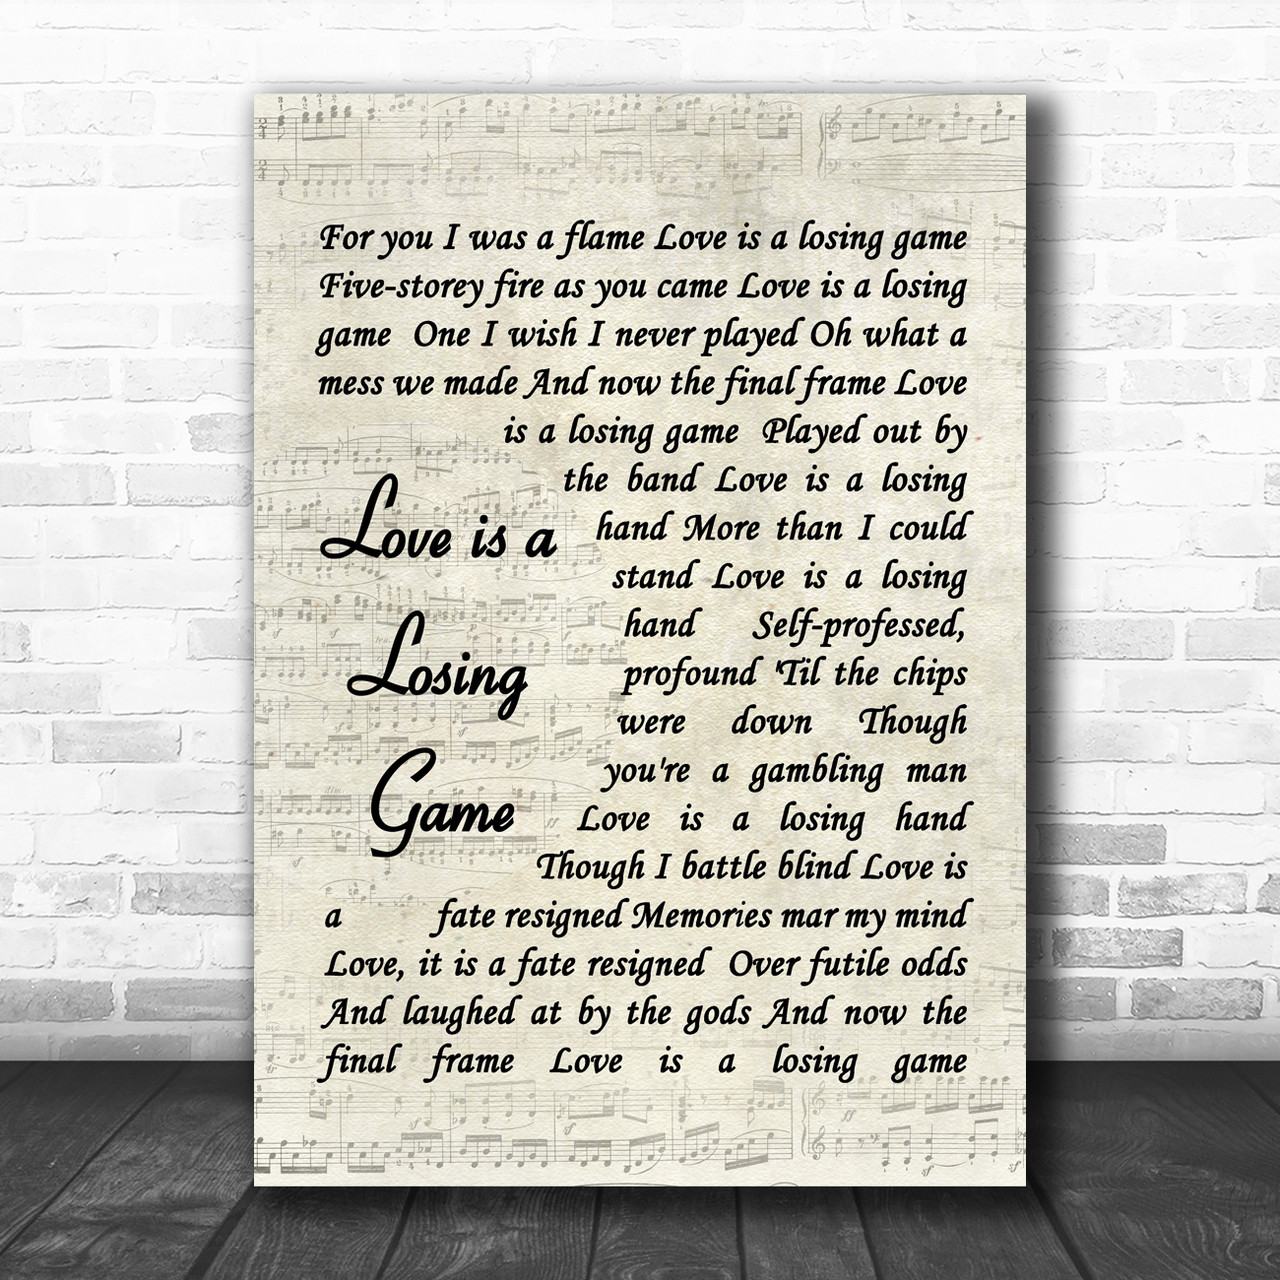 Love is a losing game- Amy Winehouse  Amy winehouse lyrics, Amy winehouse,  Winehouse